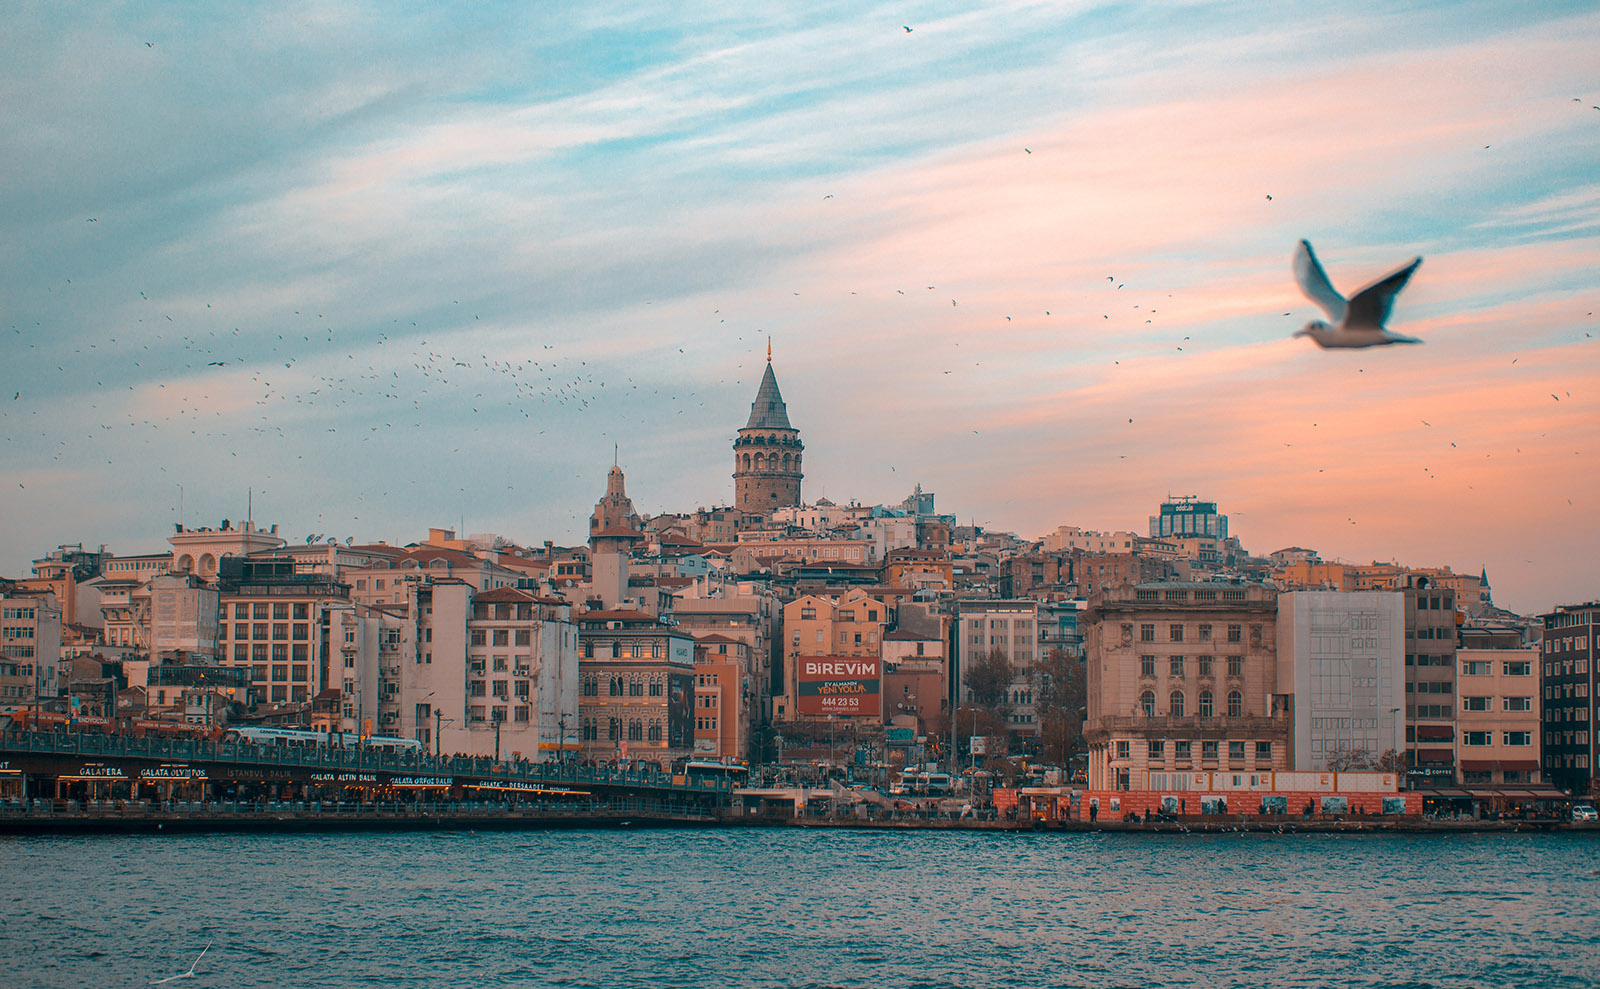 Yearning for Home: 'Tell Me About Istanbul' by Nazim Hikmet